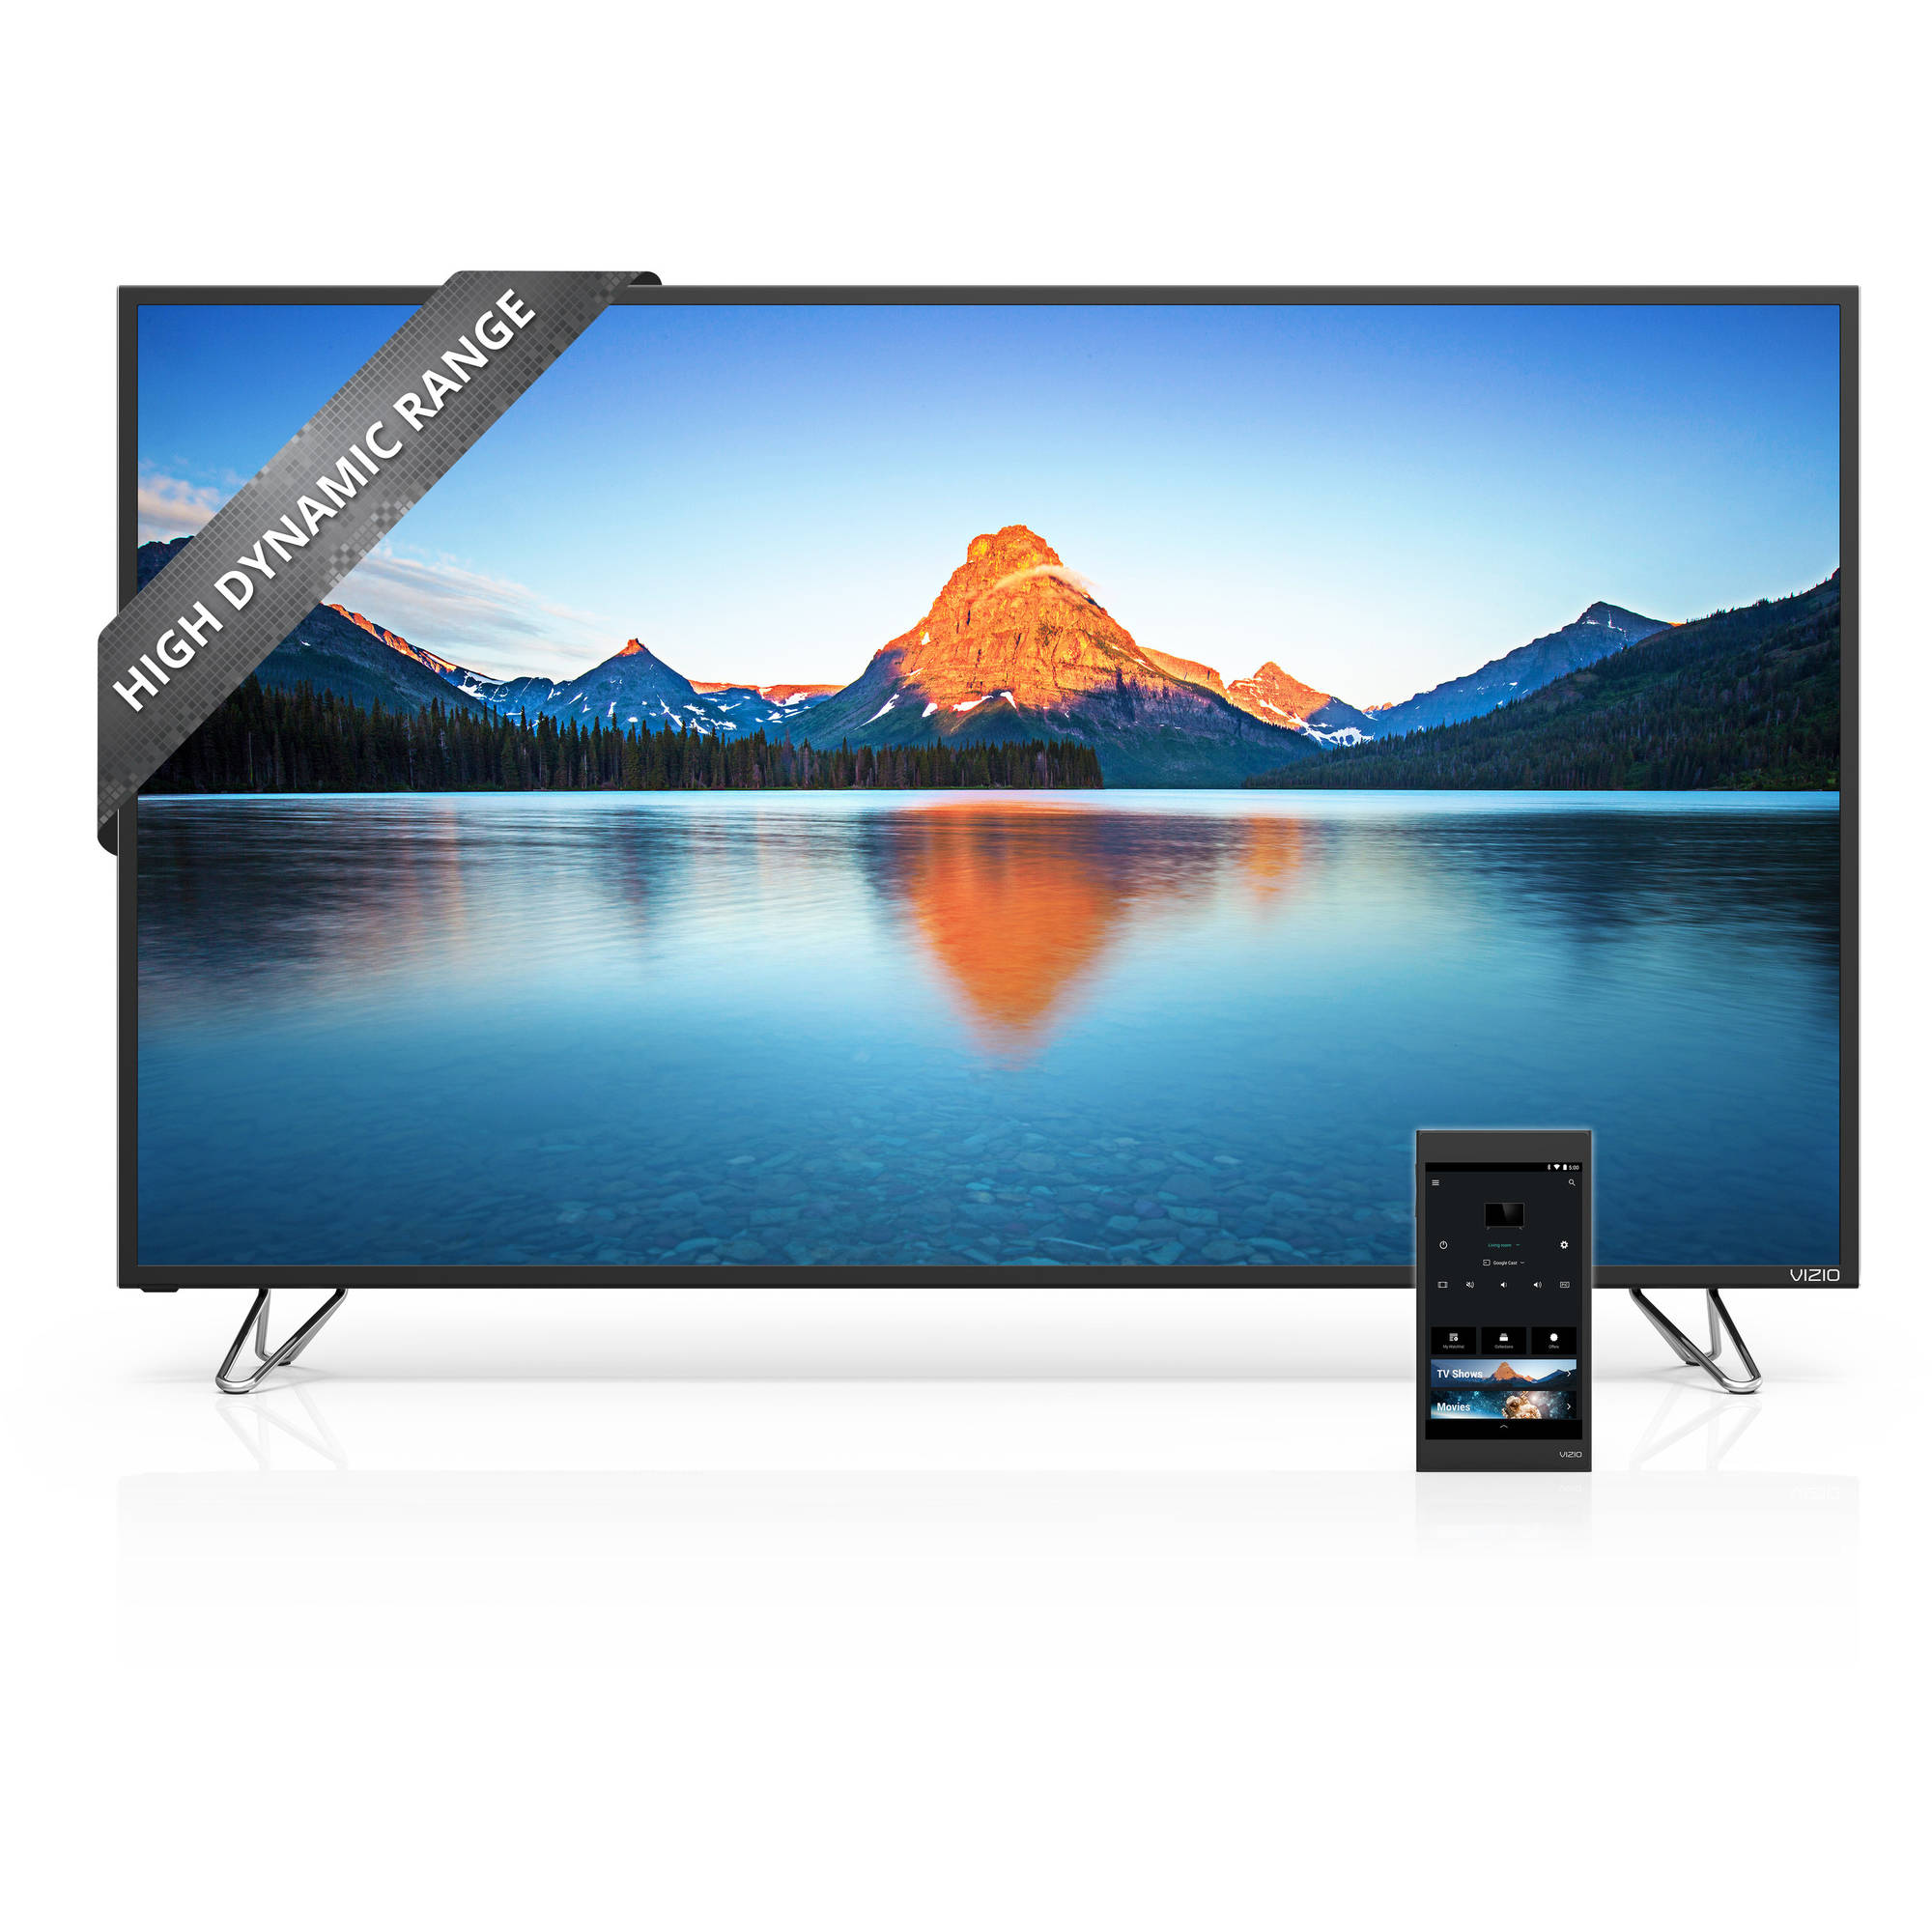 VIZIO 50" Class 4K (2160P) Smart LED Home Theater Display (M50-D1) - image 1 of 13